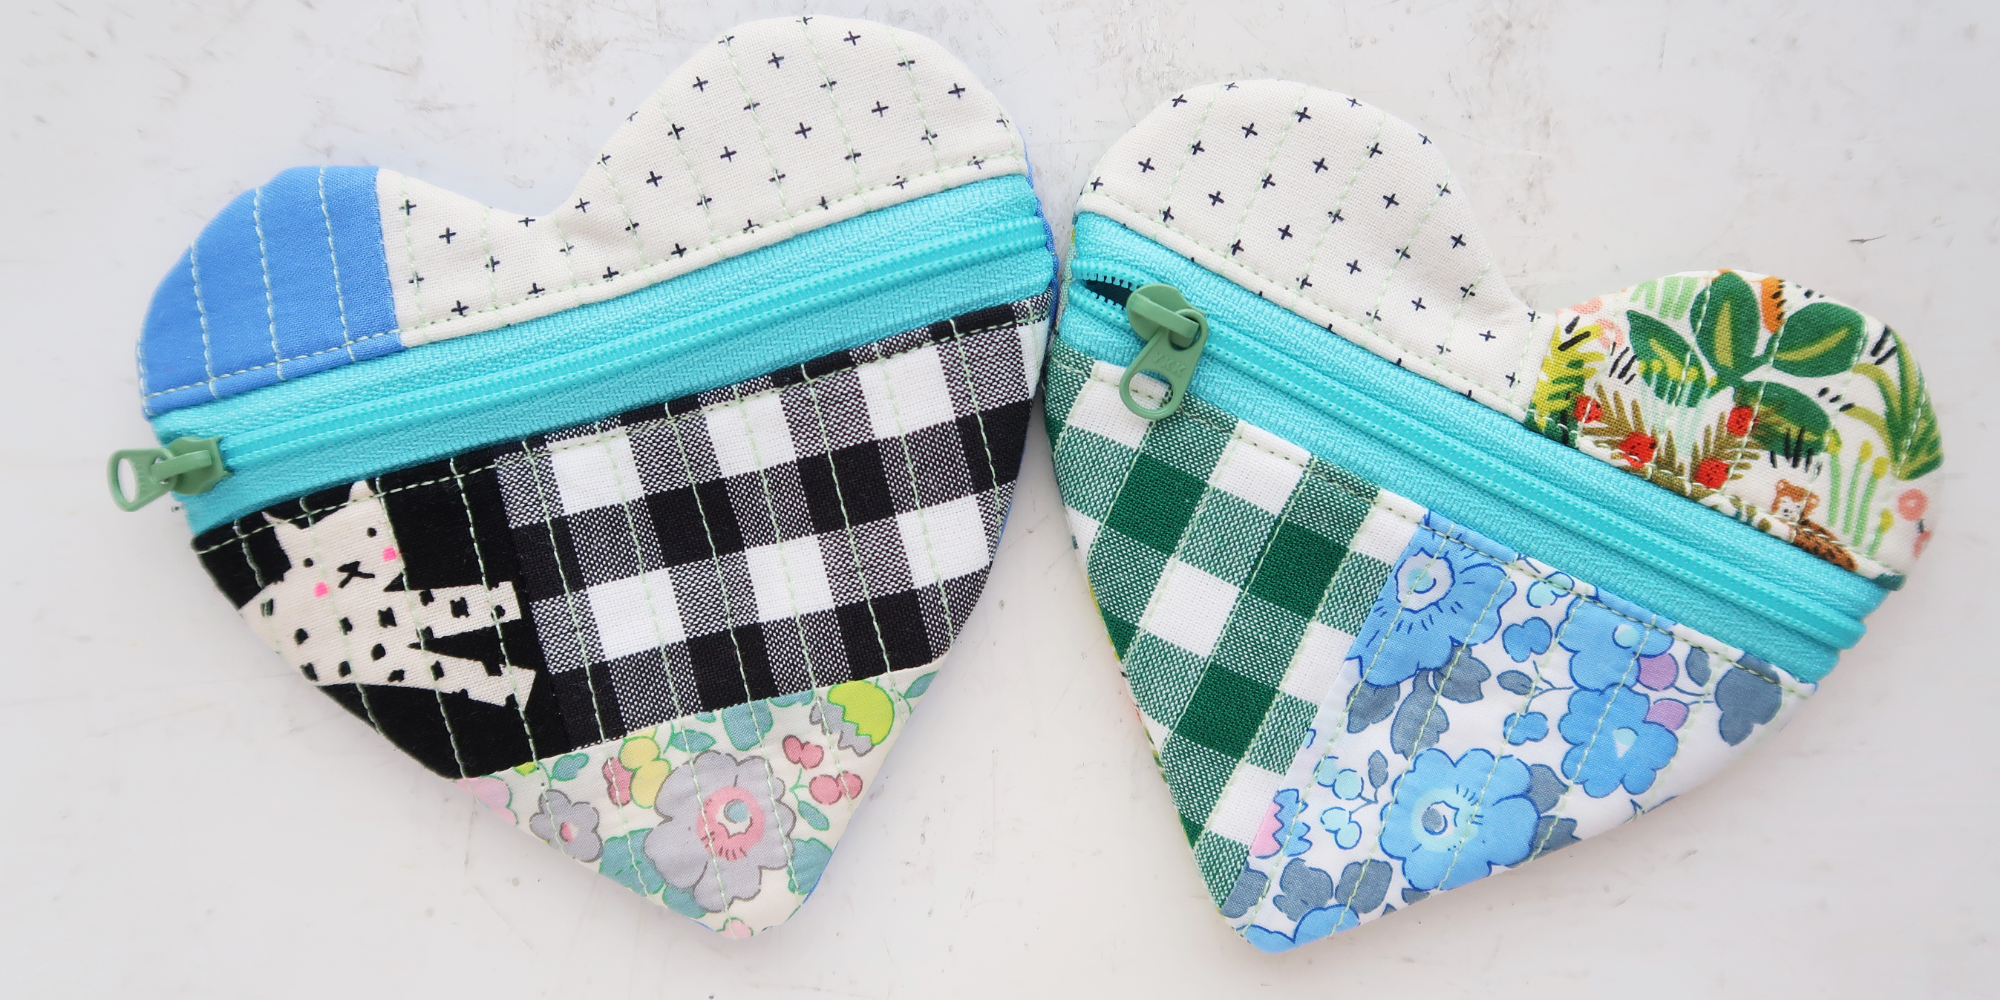 heart shaped zipper pouch - sewing pattern and video tutorial for beginners